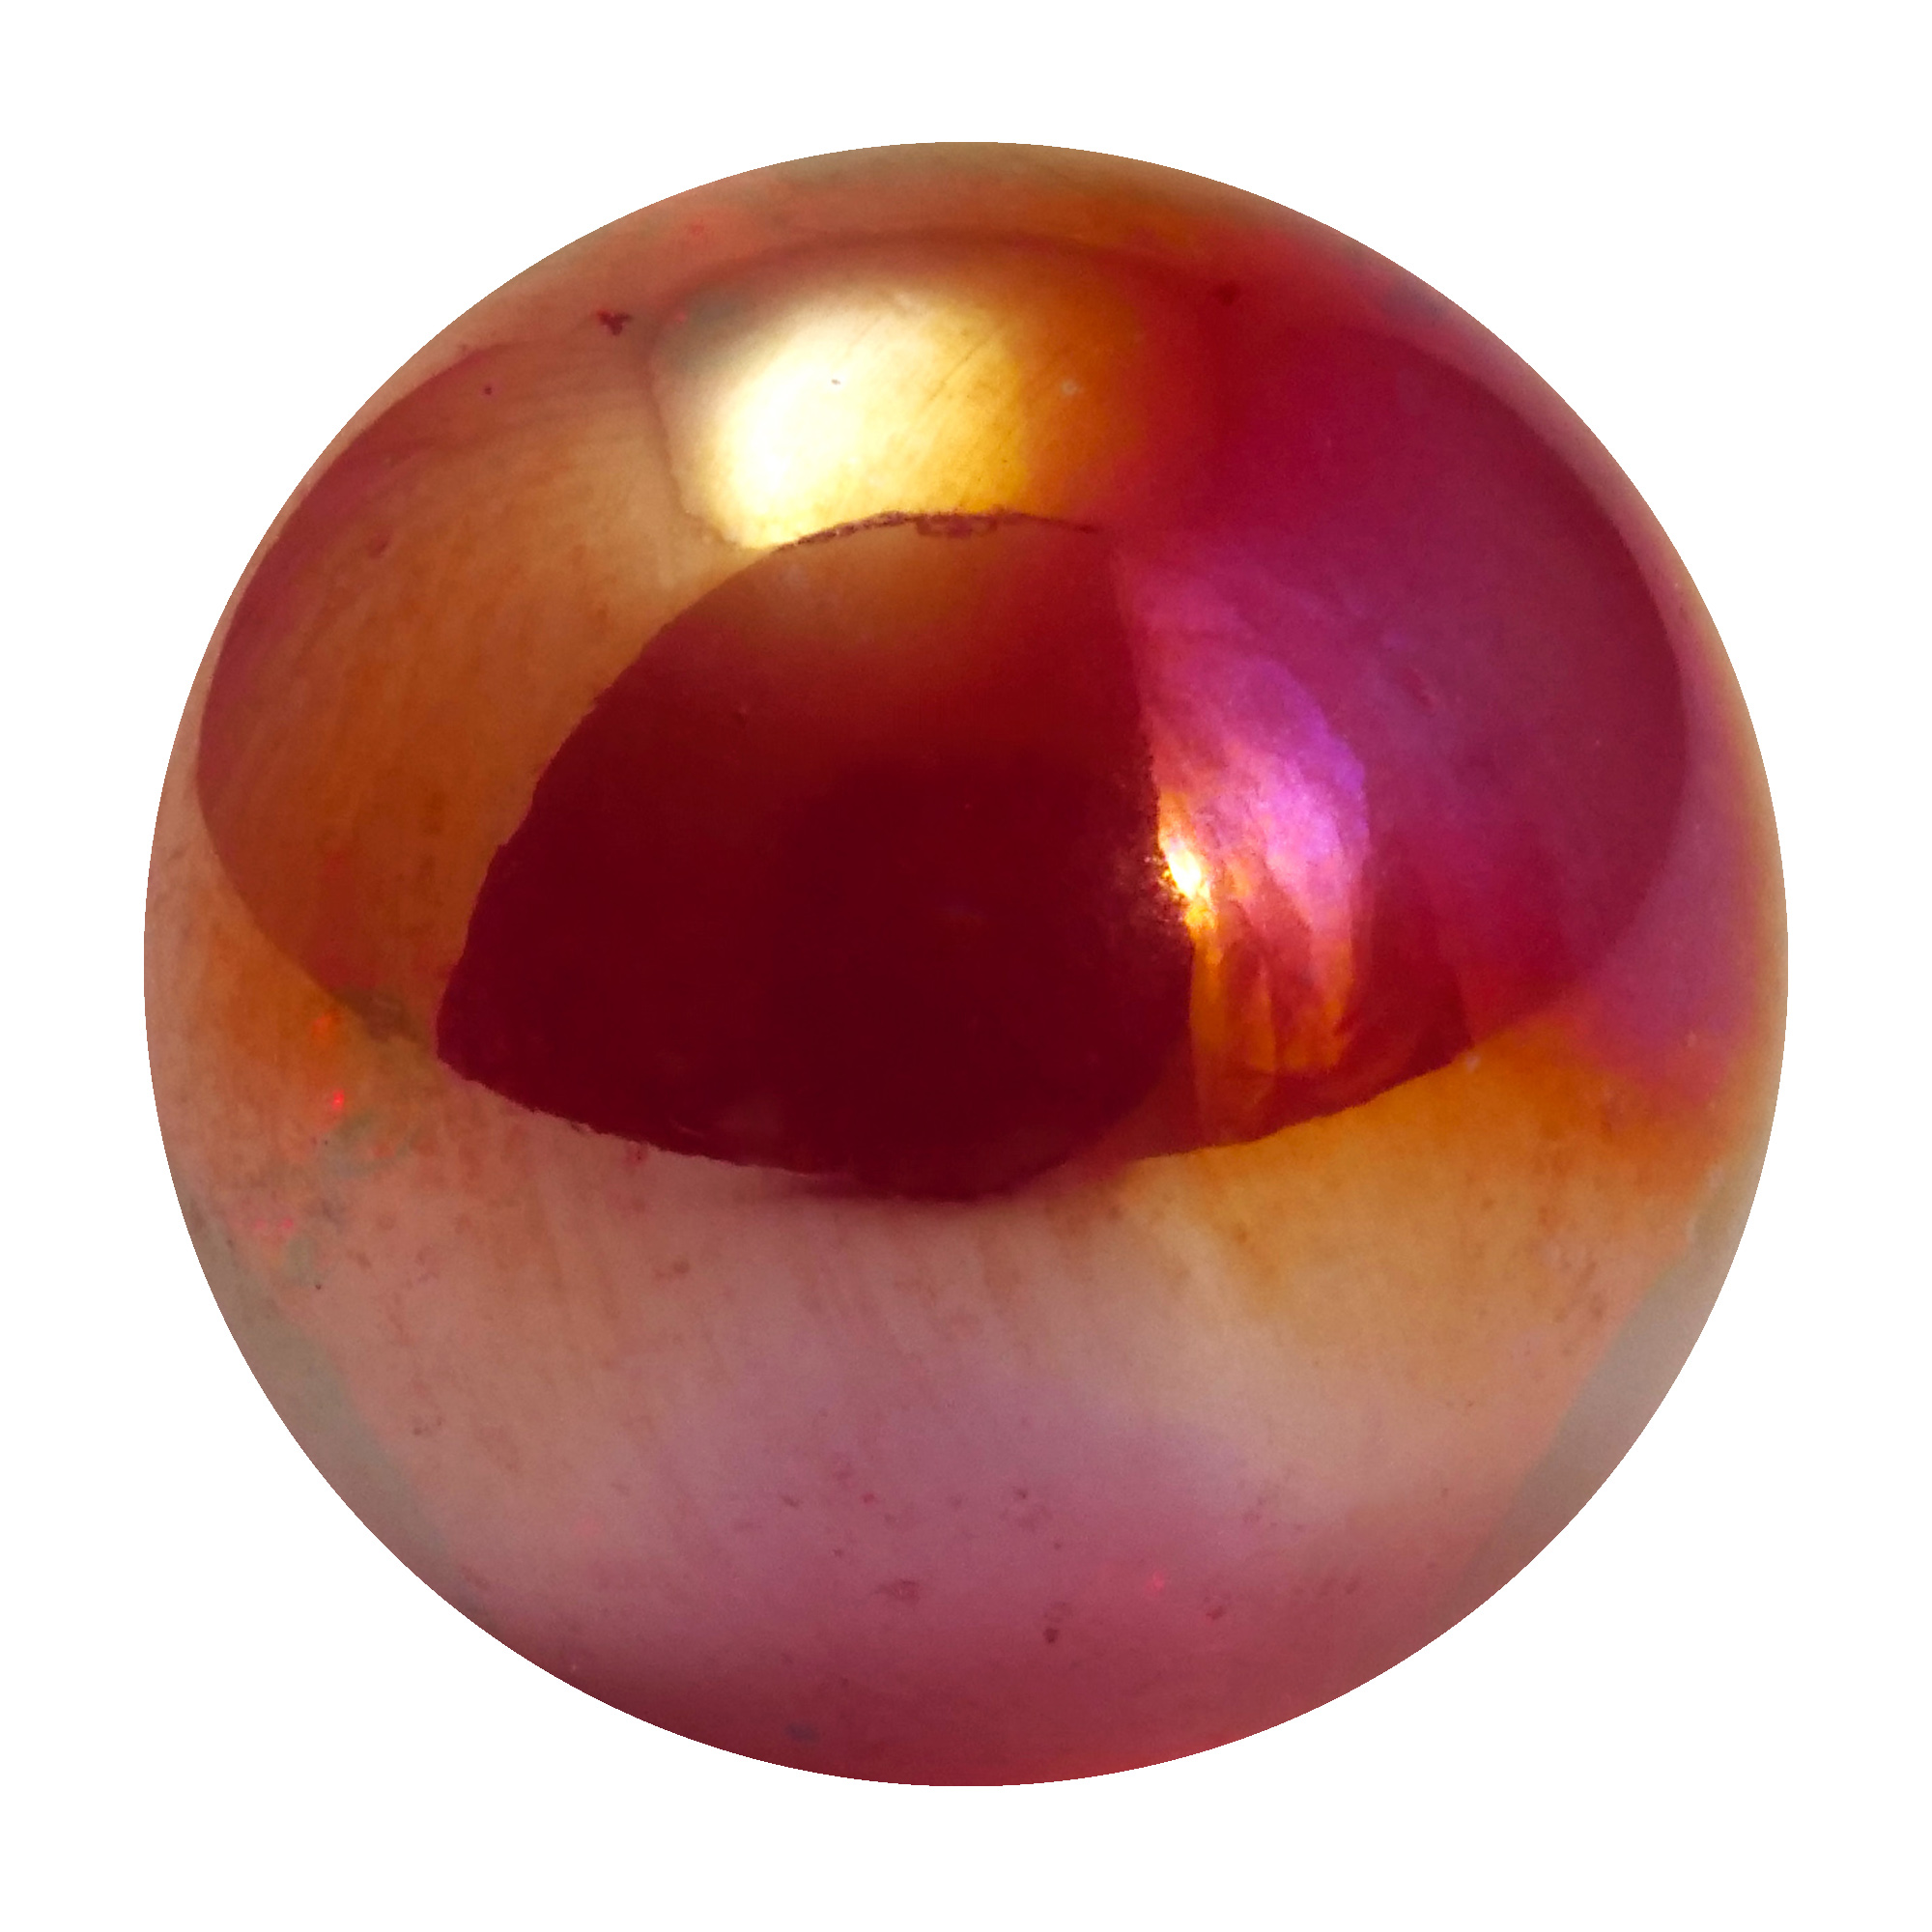 Red Marbles stock photo. Image of glass, sphere, play - 20123002